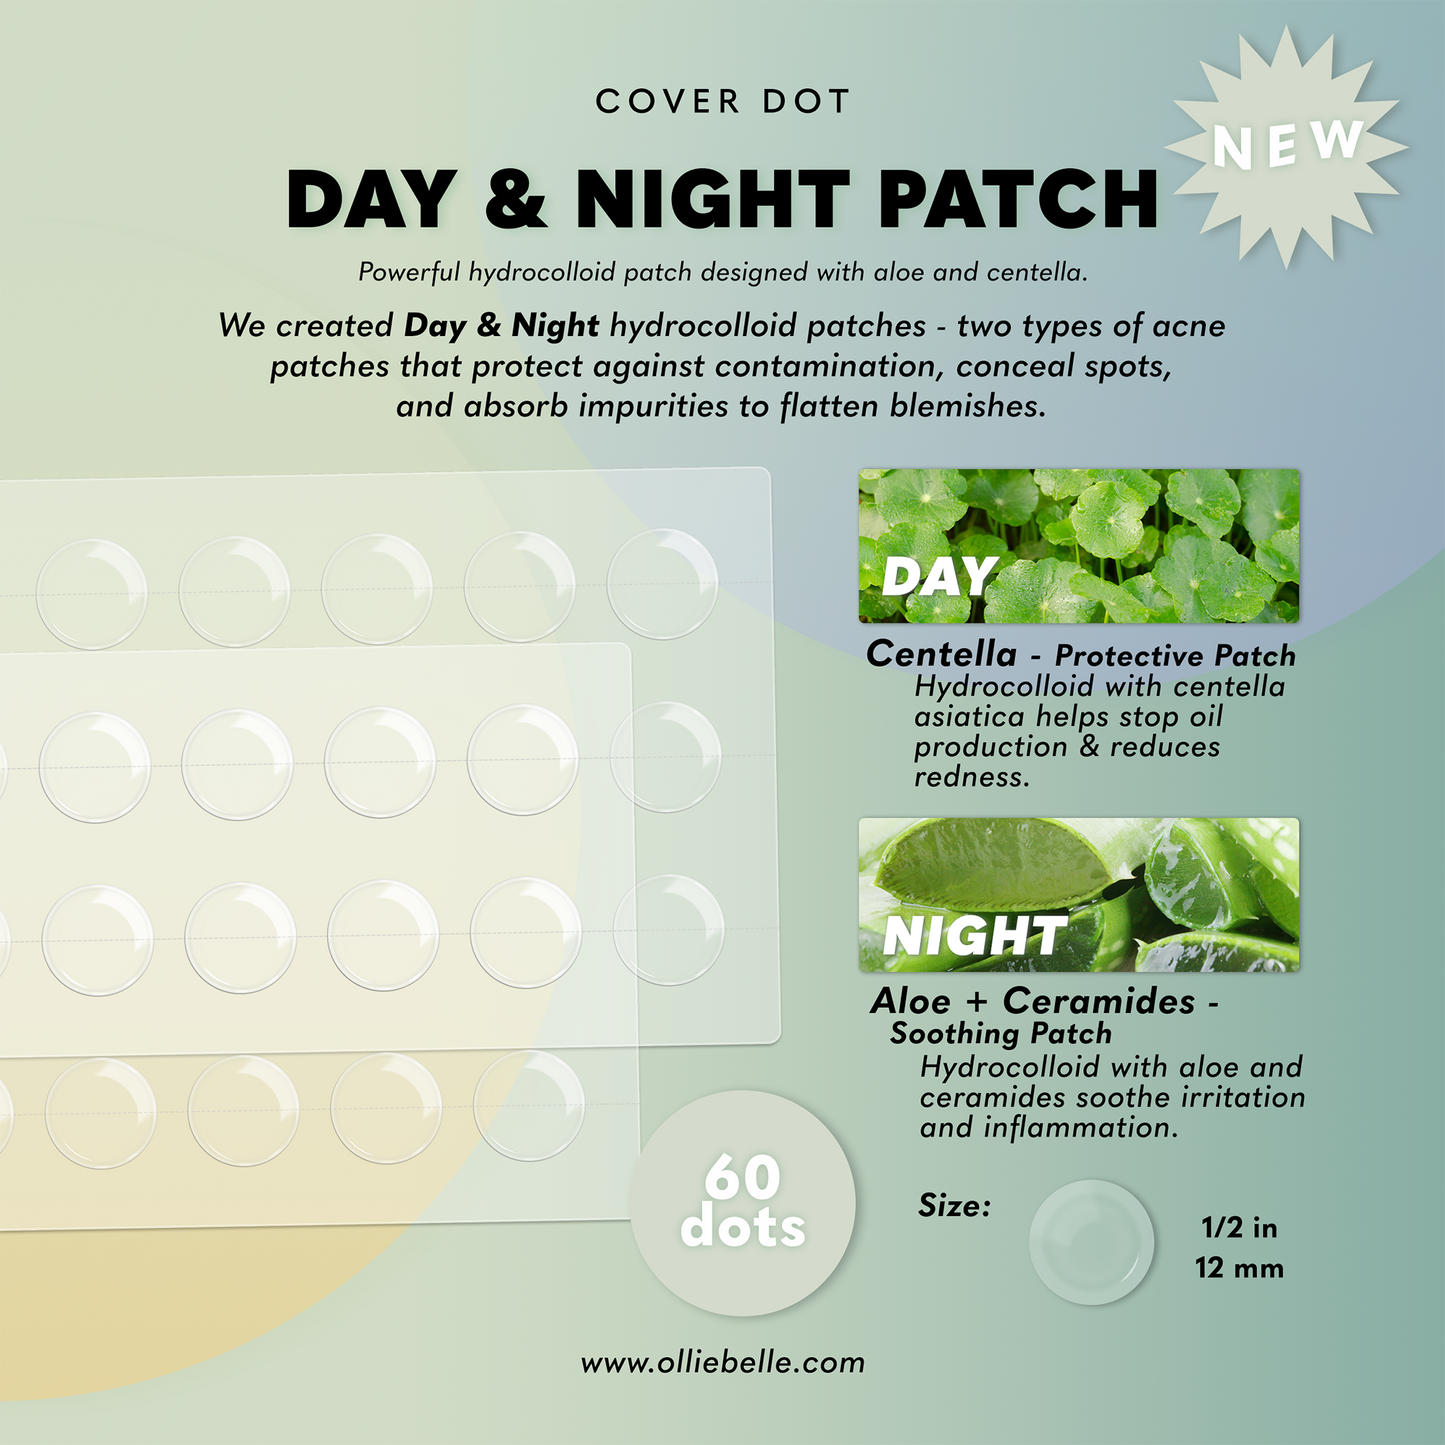 Cover Dot Day & Night 60 Acne Patch Description 12mm Centella Aloe Ceramides Protective & Soothing Patches